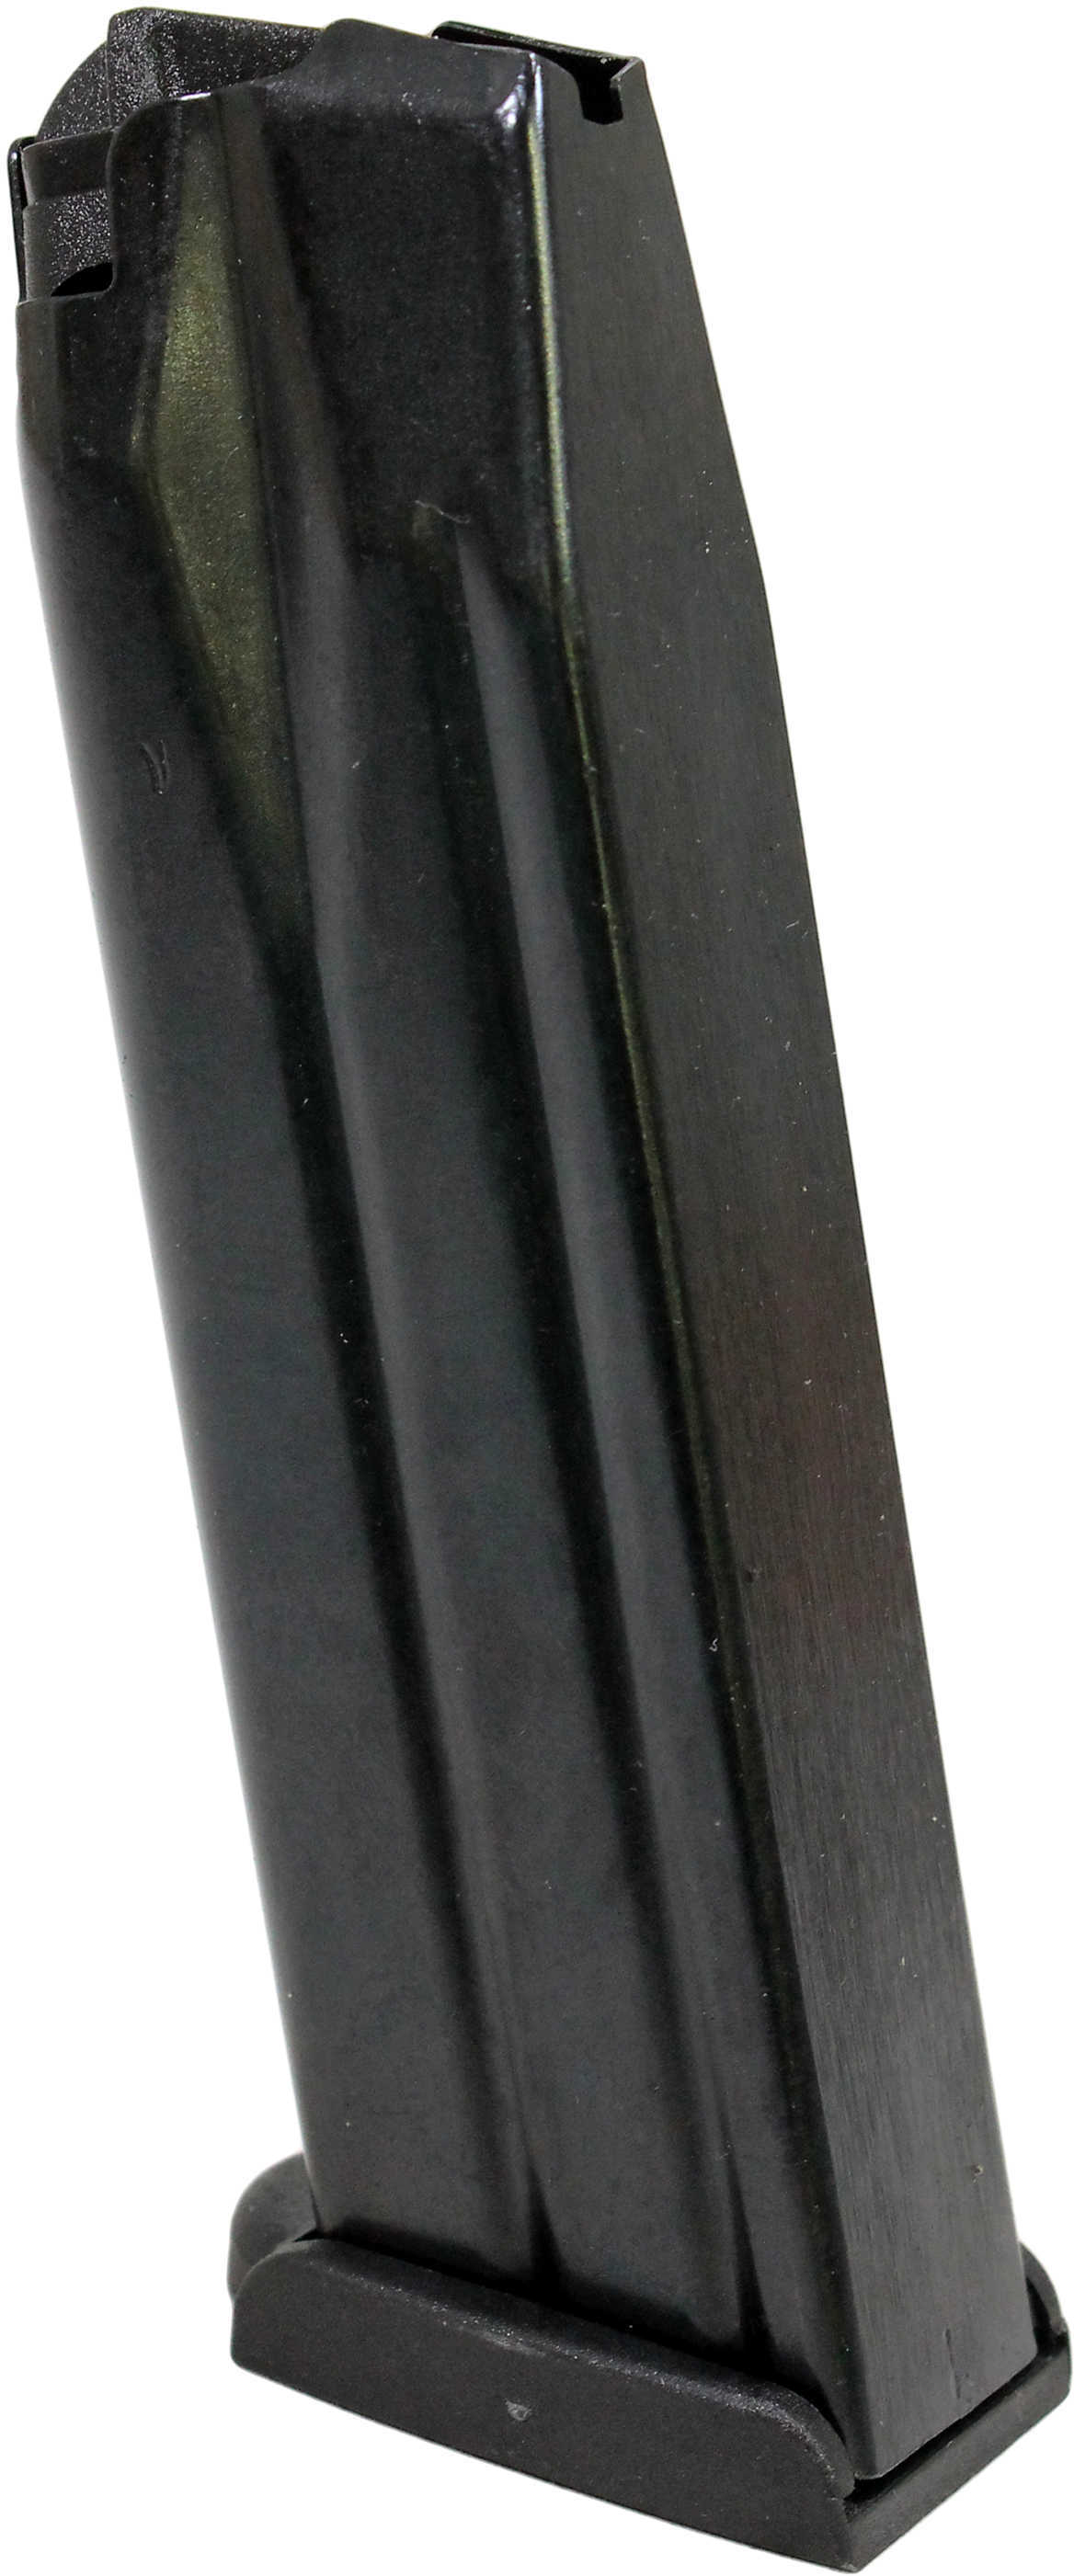 ProMag 9mm 17-Round Capacity Magazine For HK VP9, Blued Steel Md: HECA15